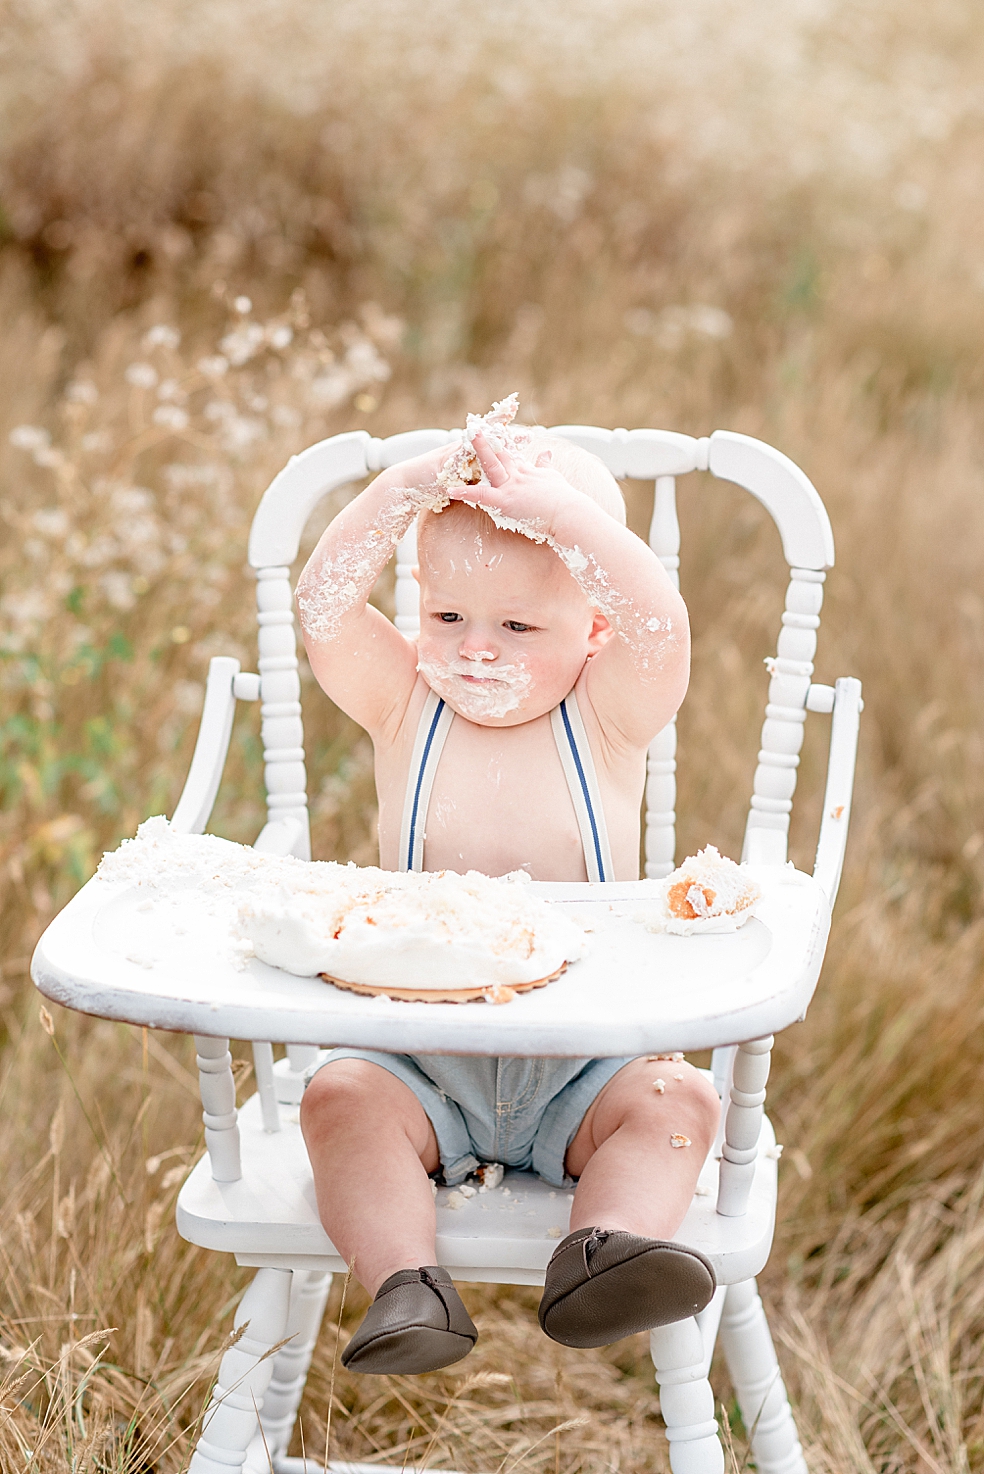 Baby boy in suspenders eating cake | Photo by Jessica Lee Photography 